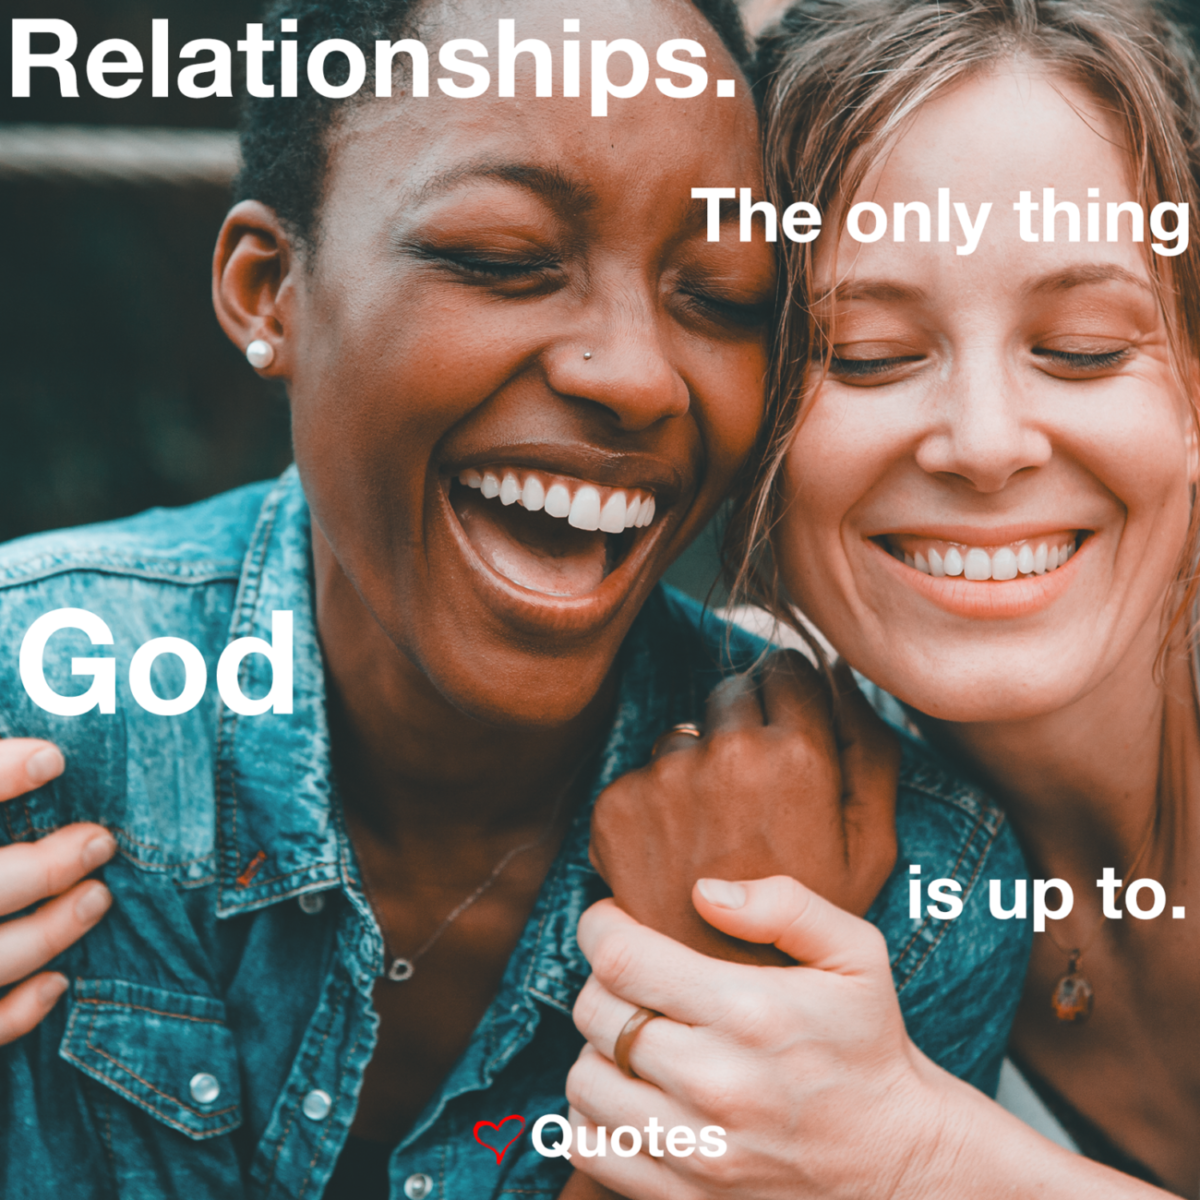 Relationships-The Only Thing God is Up To.